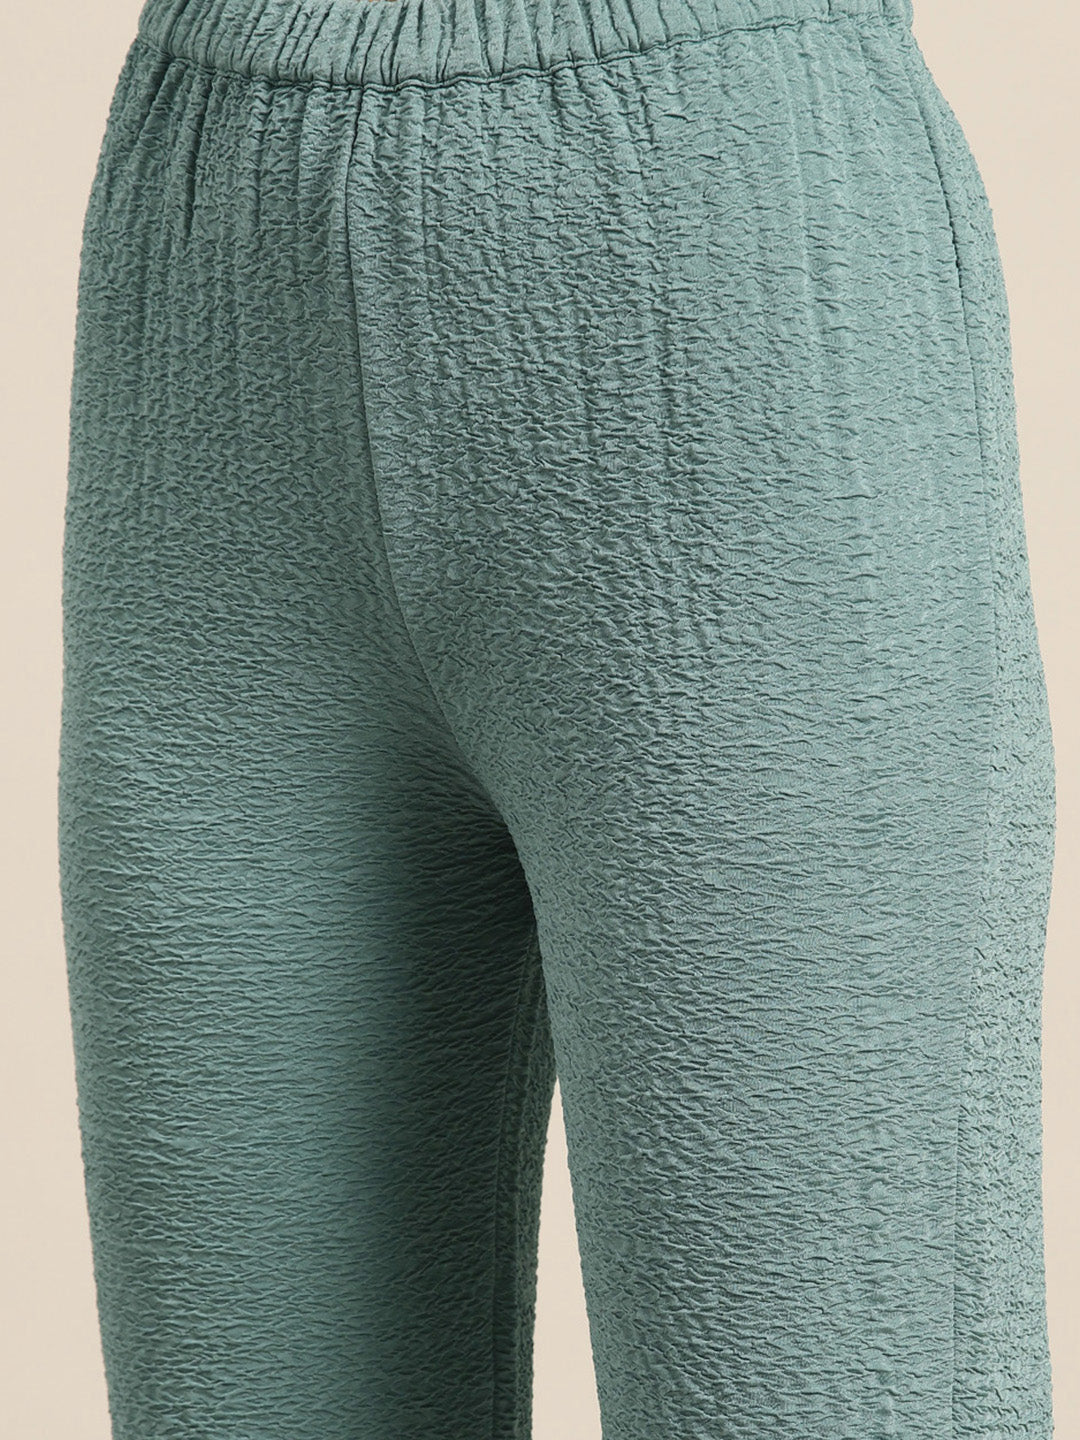 Sea green full slevees hoodie with a gold zipper and pant set.